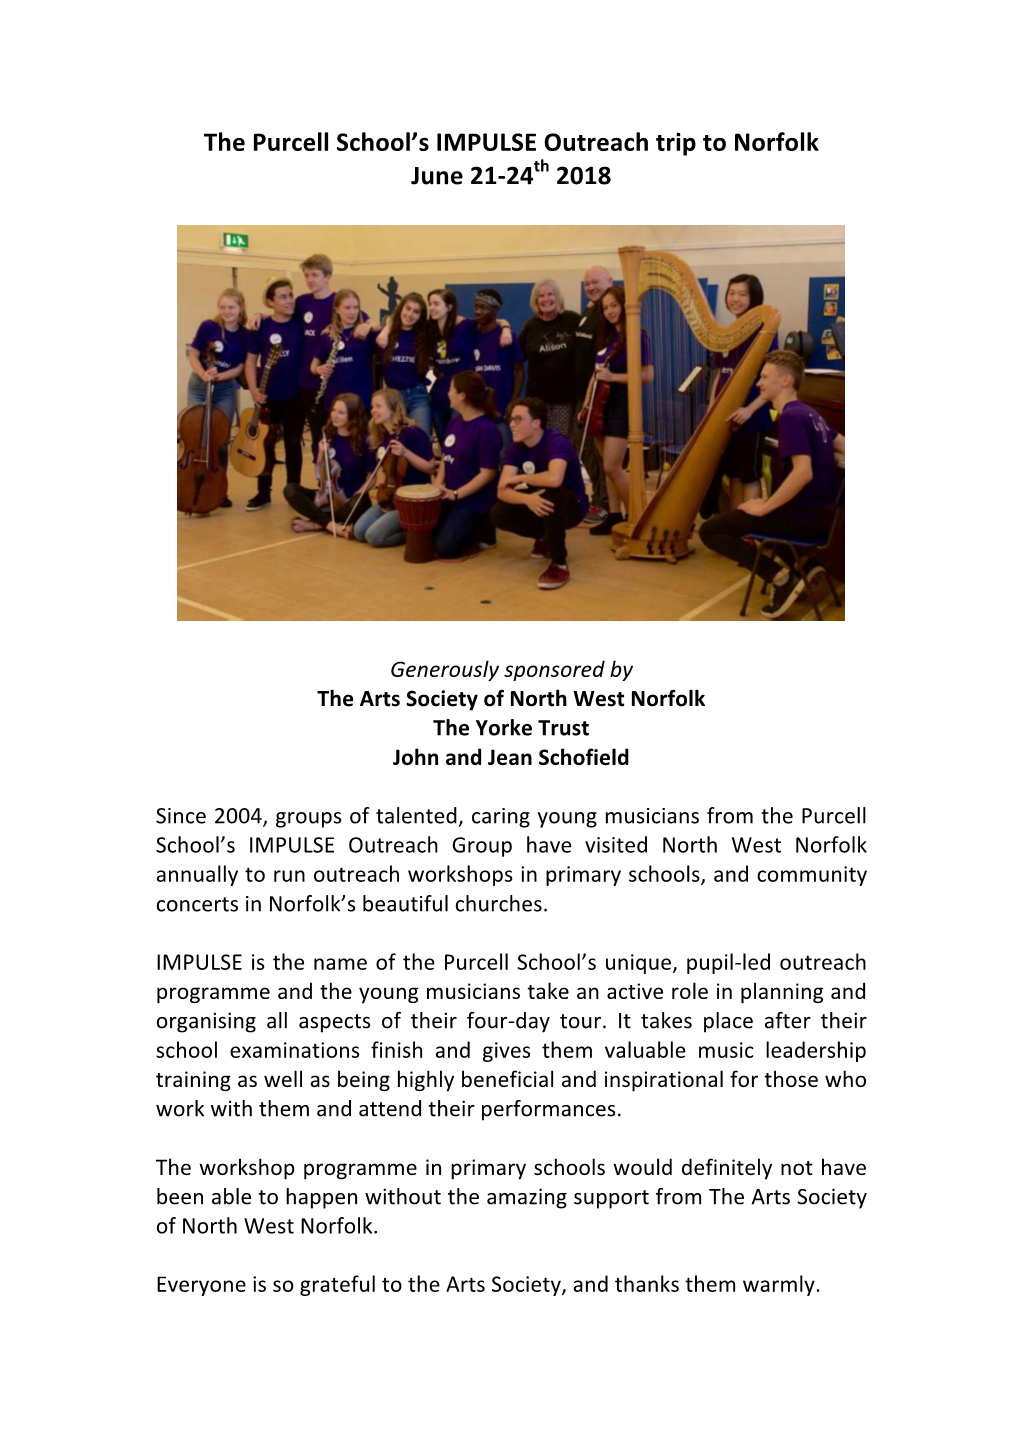 The Purcell School's IMPULSE Outreach Trip to Norfolk June 21